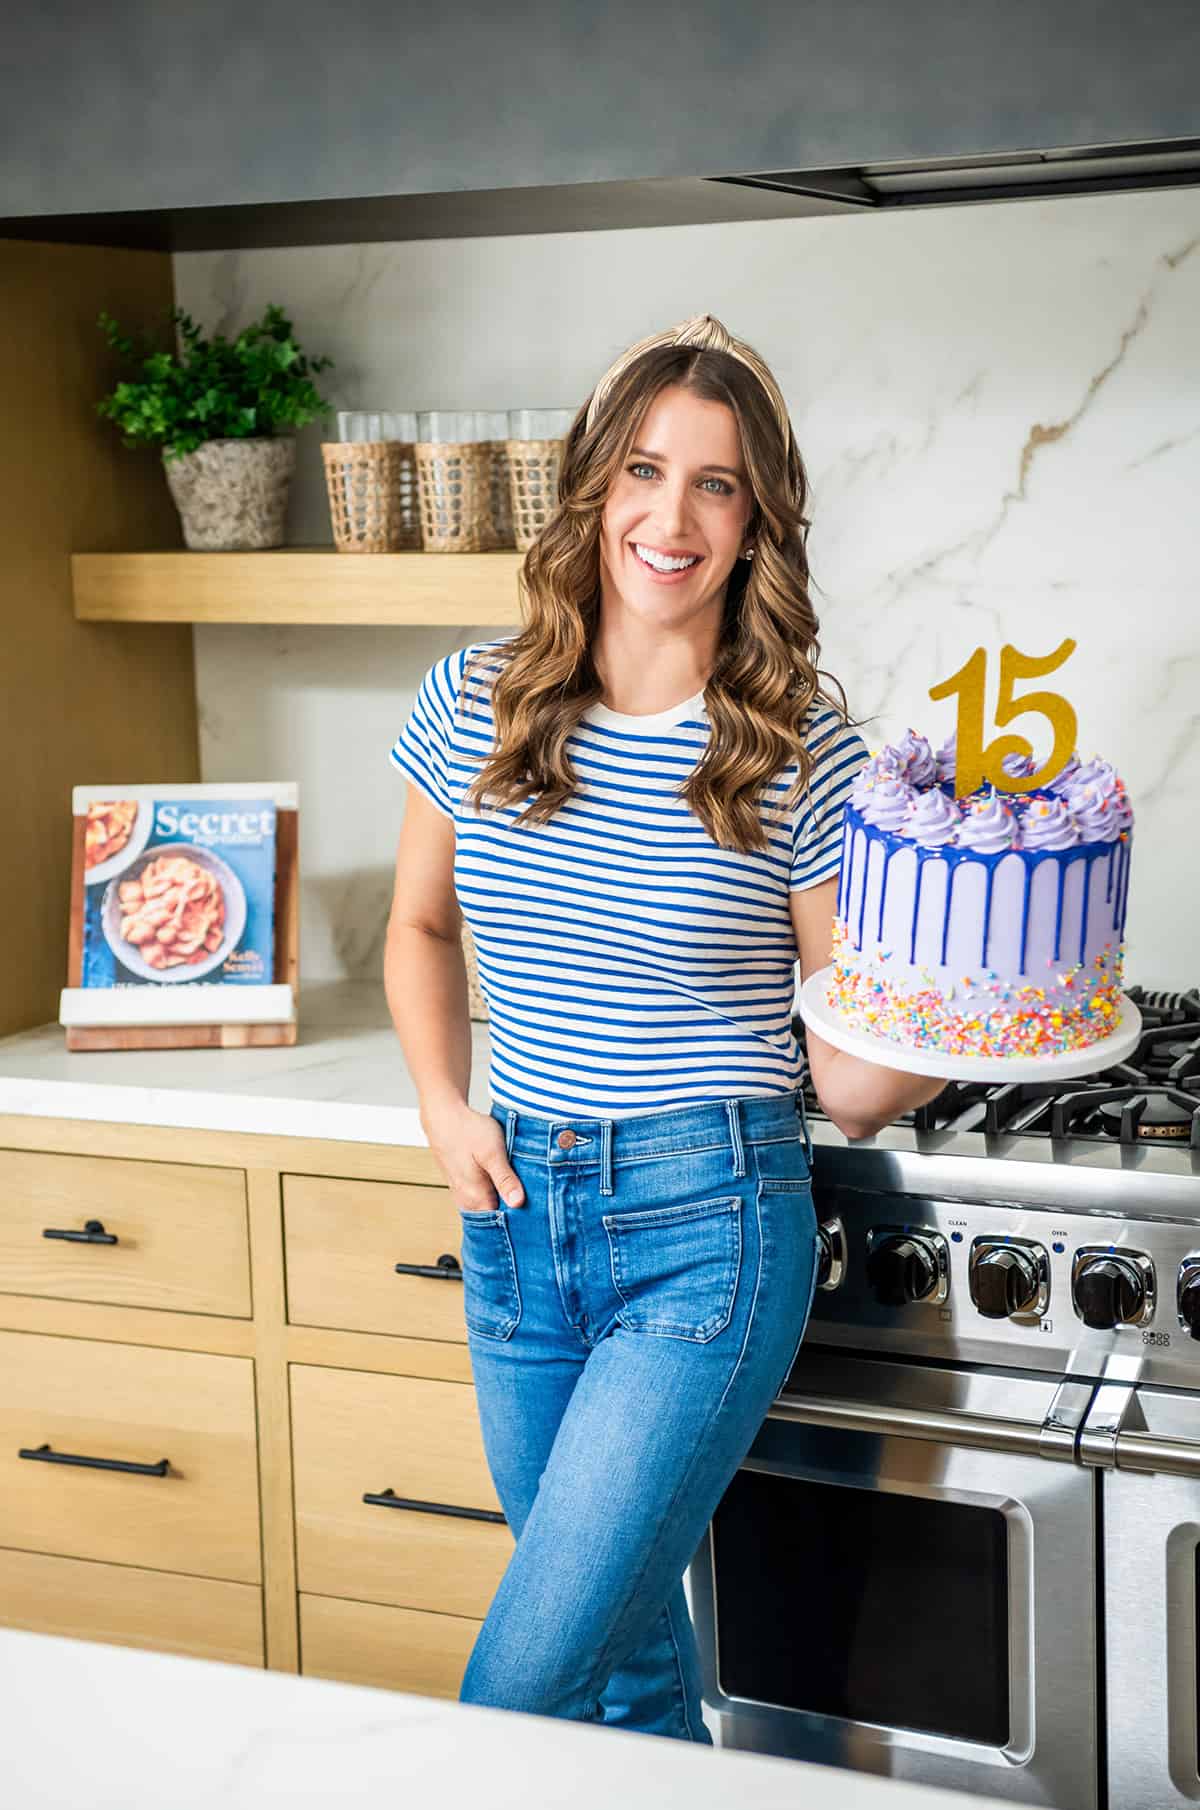 Chef Kelly Senyei standing in her kitchen holding a purple cake with the number "15" on it.